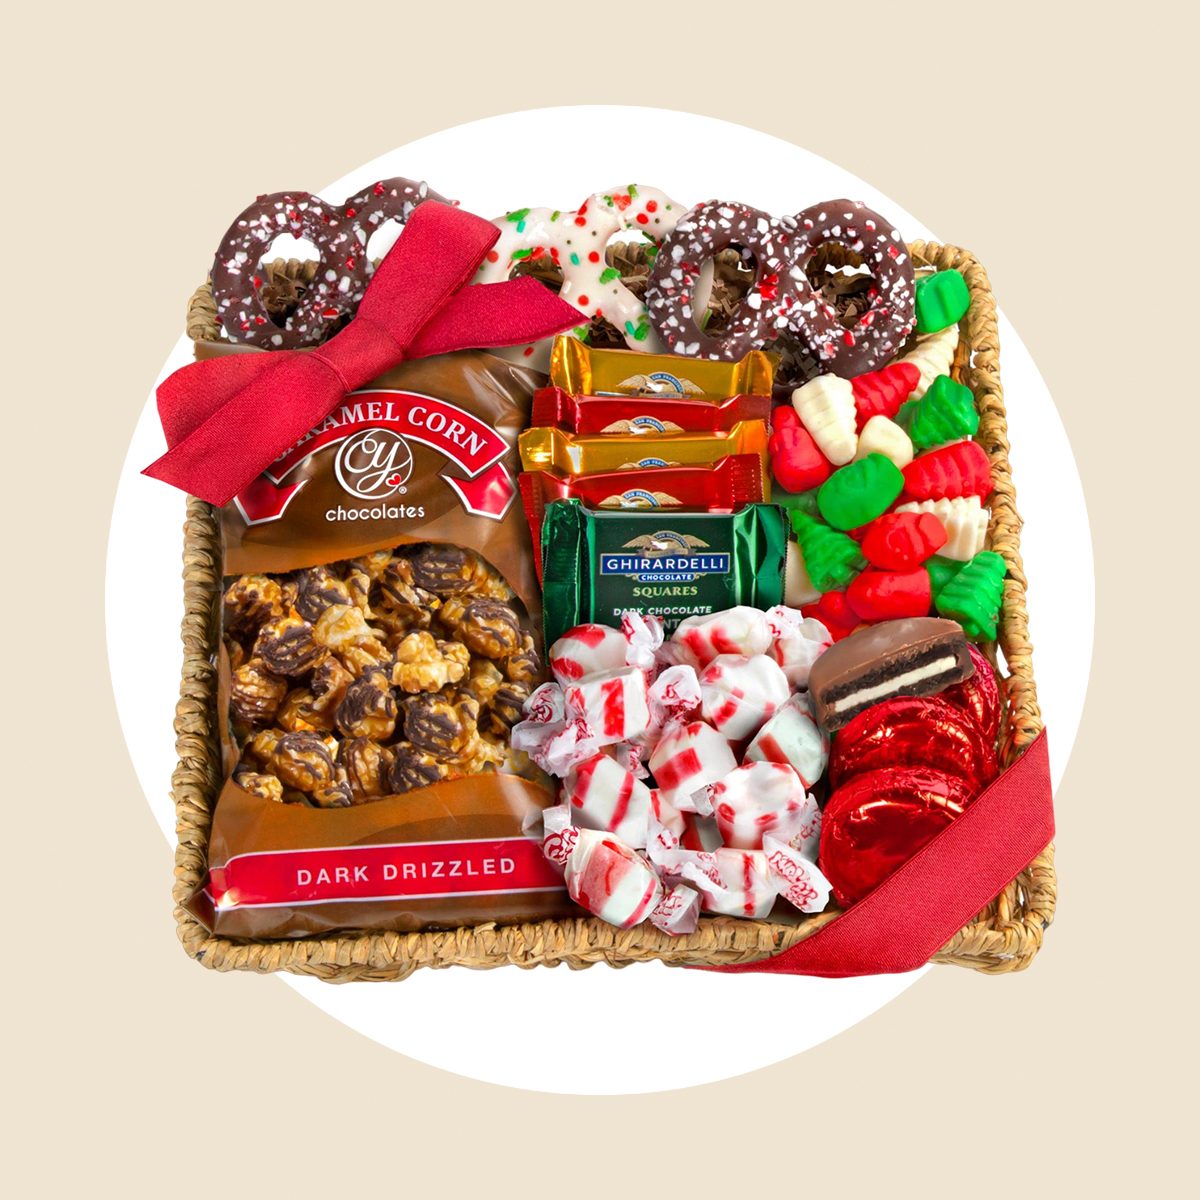 23 Best Christmas Gift Baskets for All Your Friends and Family